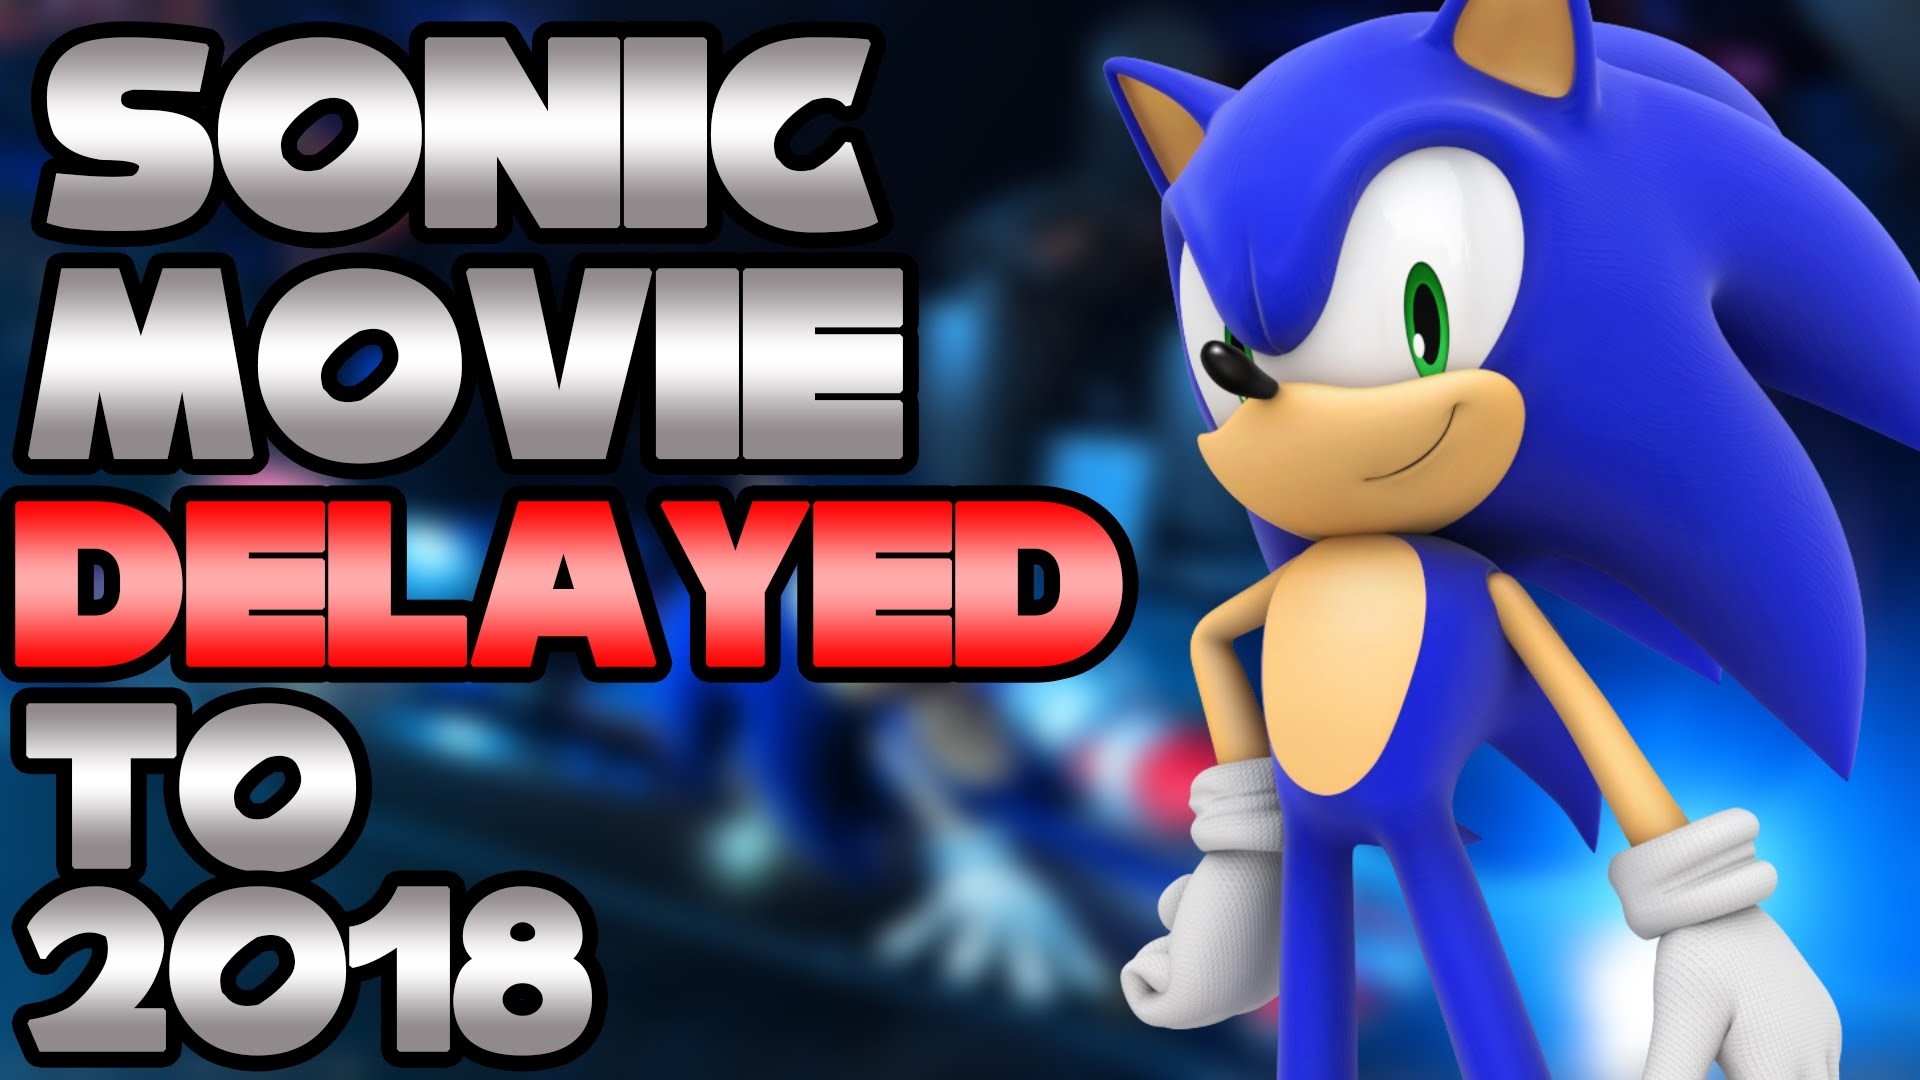 1920x1080 Sonic the Hedgehog Movie Delayed to 2018